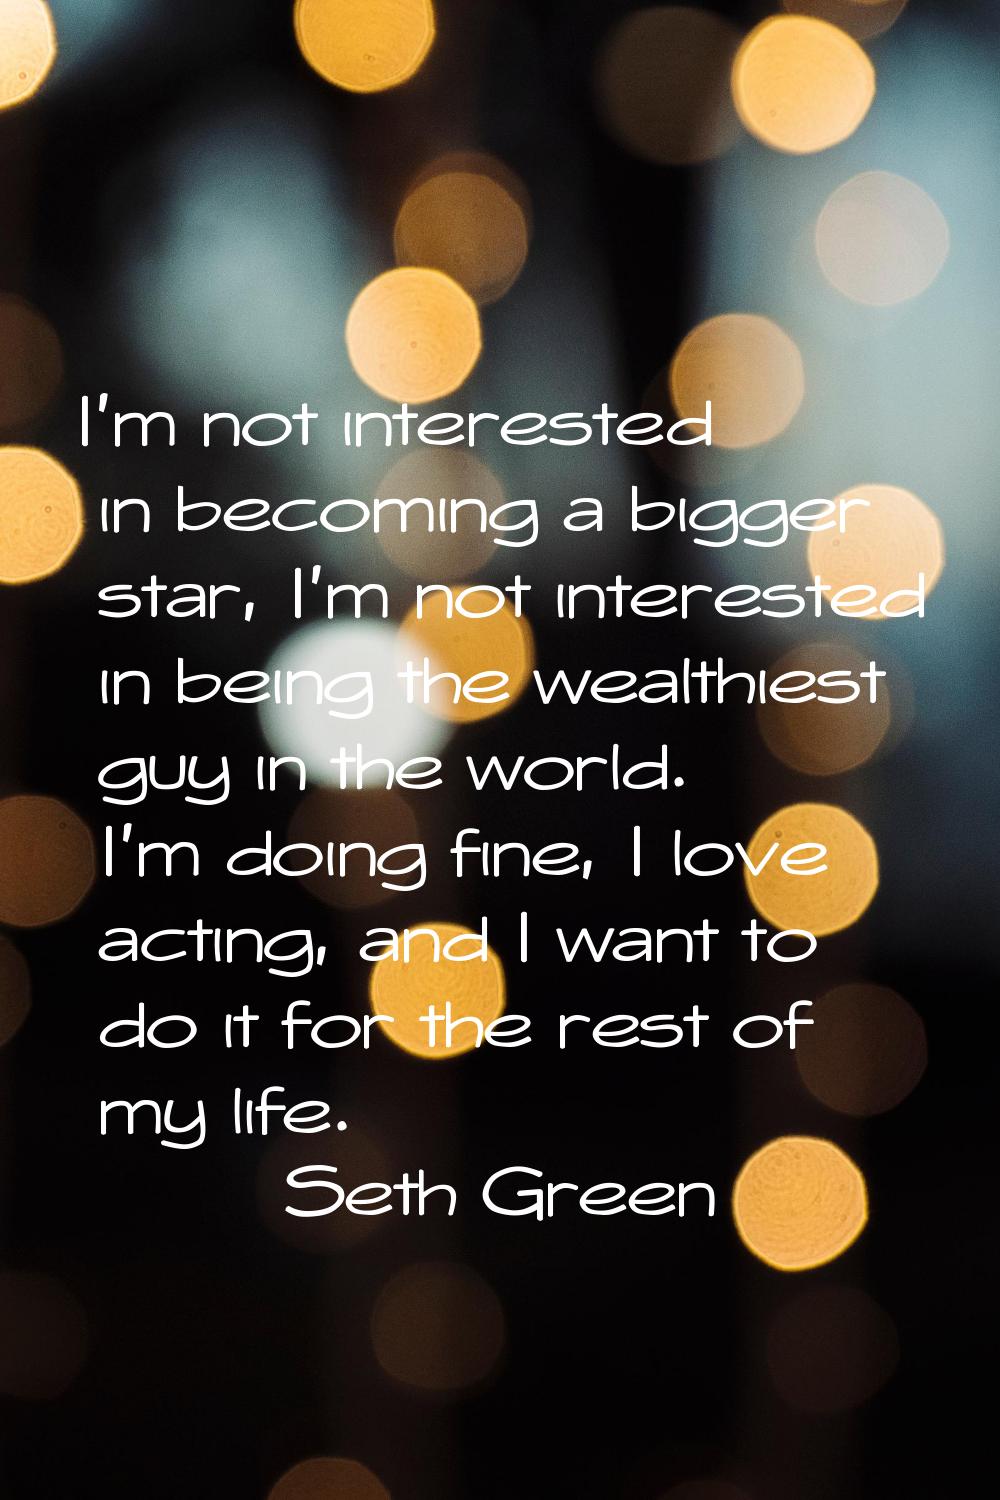 I'm not interested in becoming a bigger star, I'm not interested in being the wealthiest guy in the